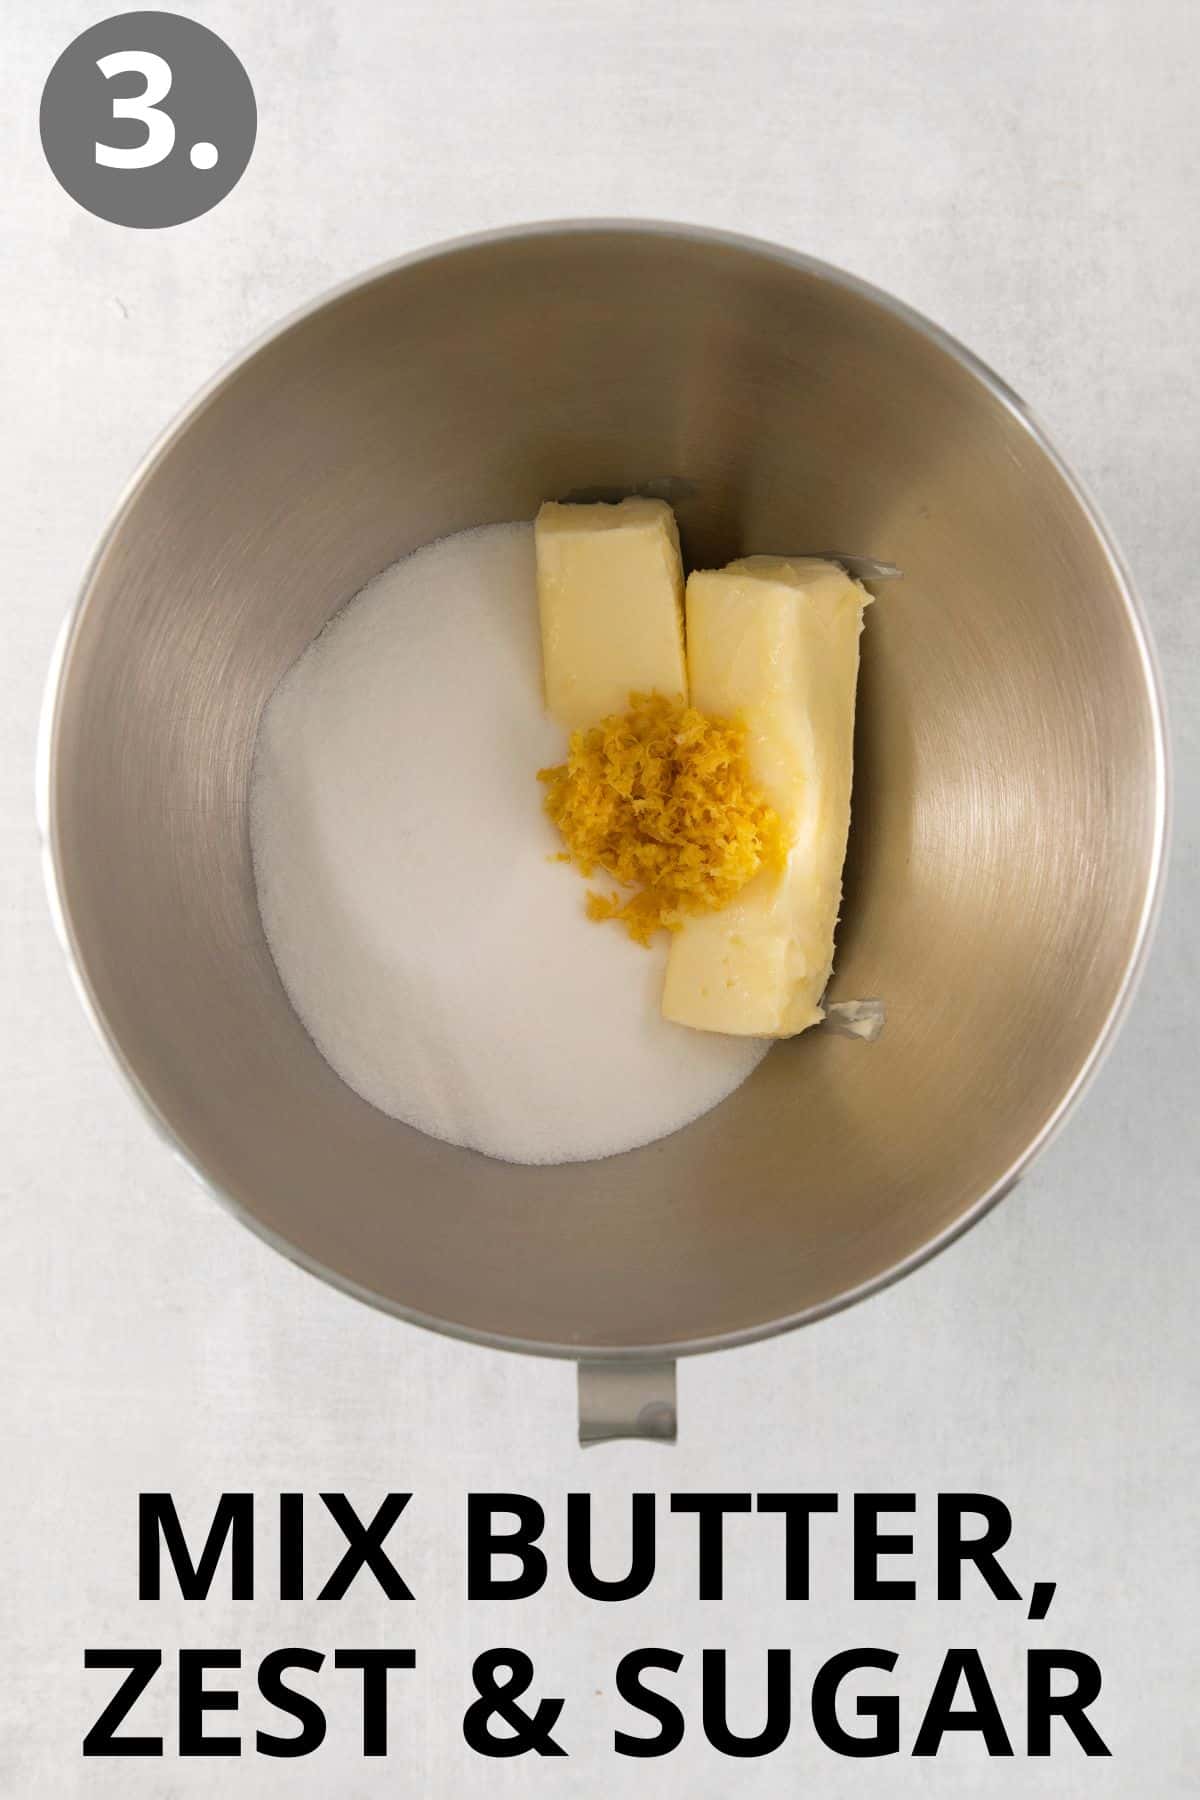 Butter, zest, and sugar in a bowl